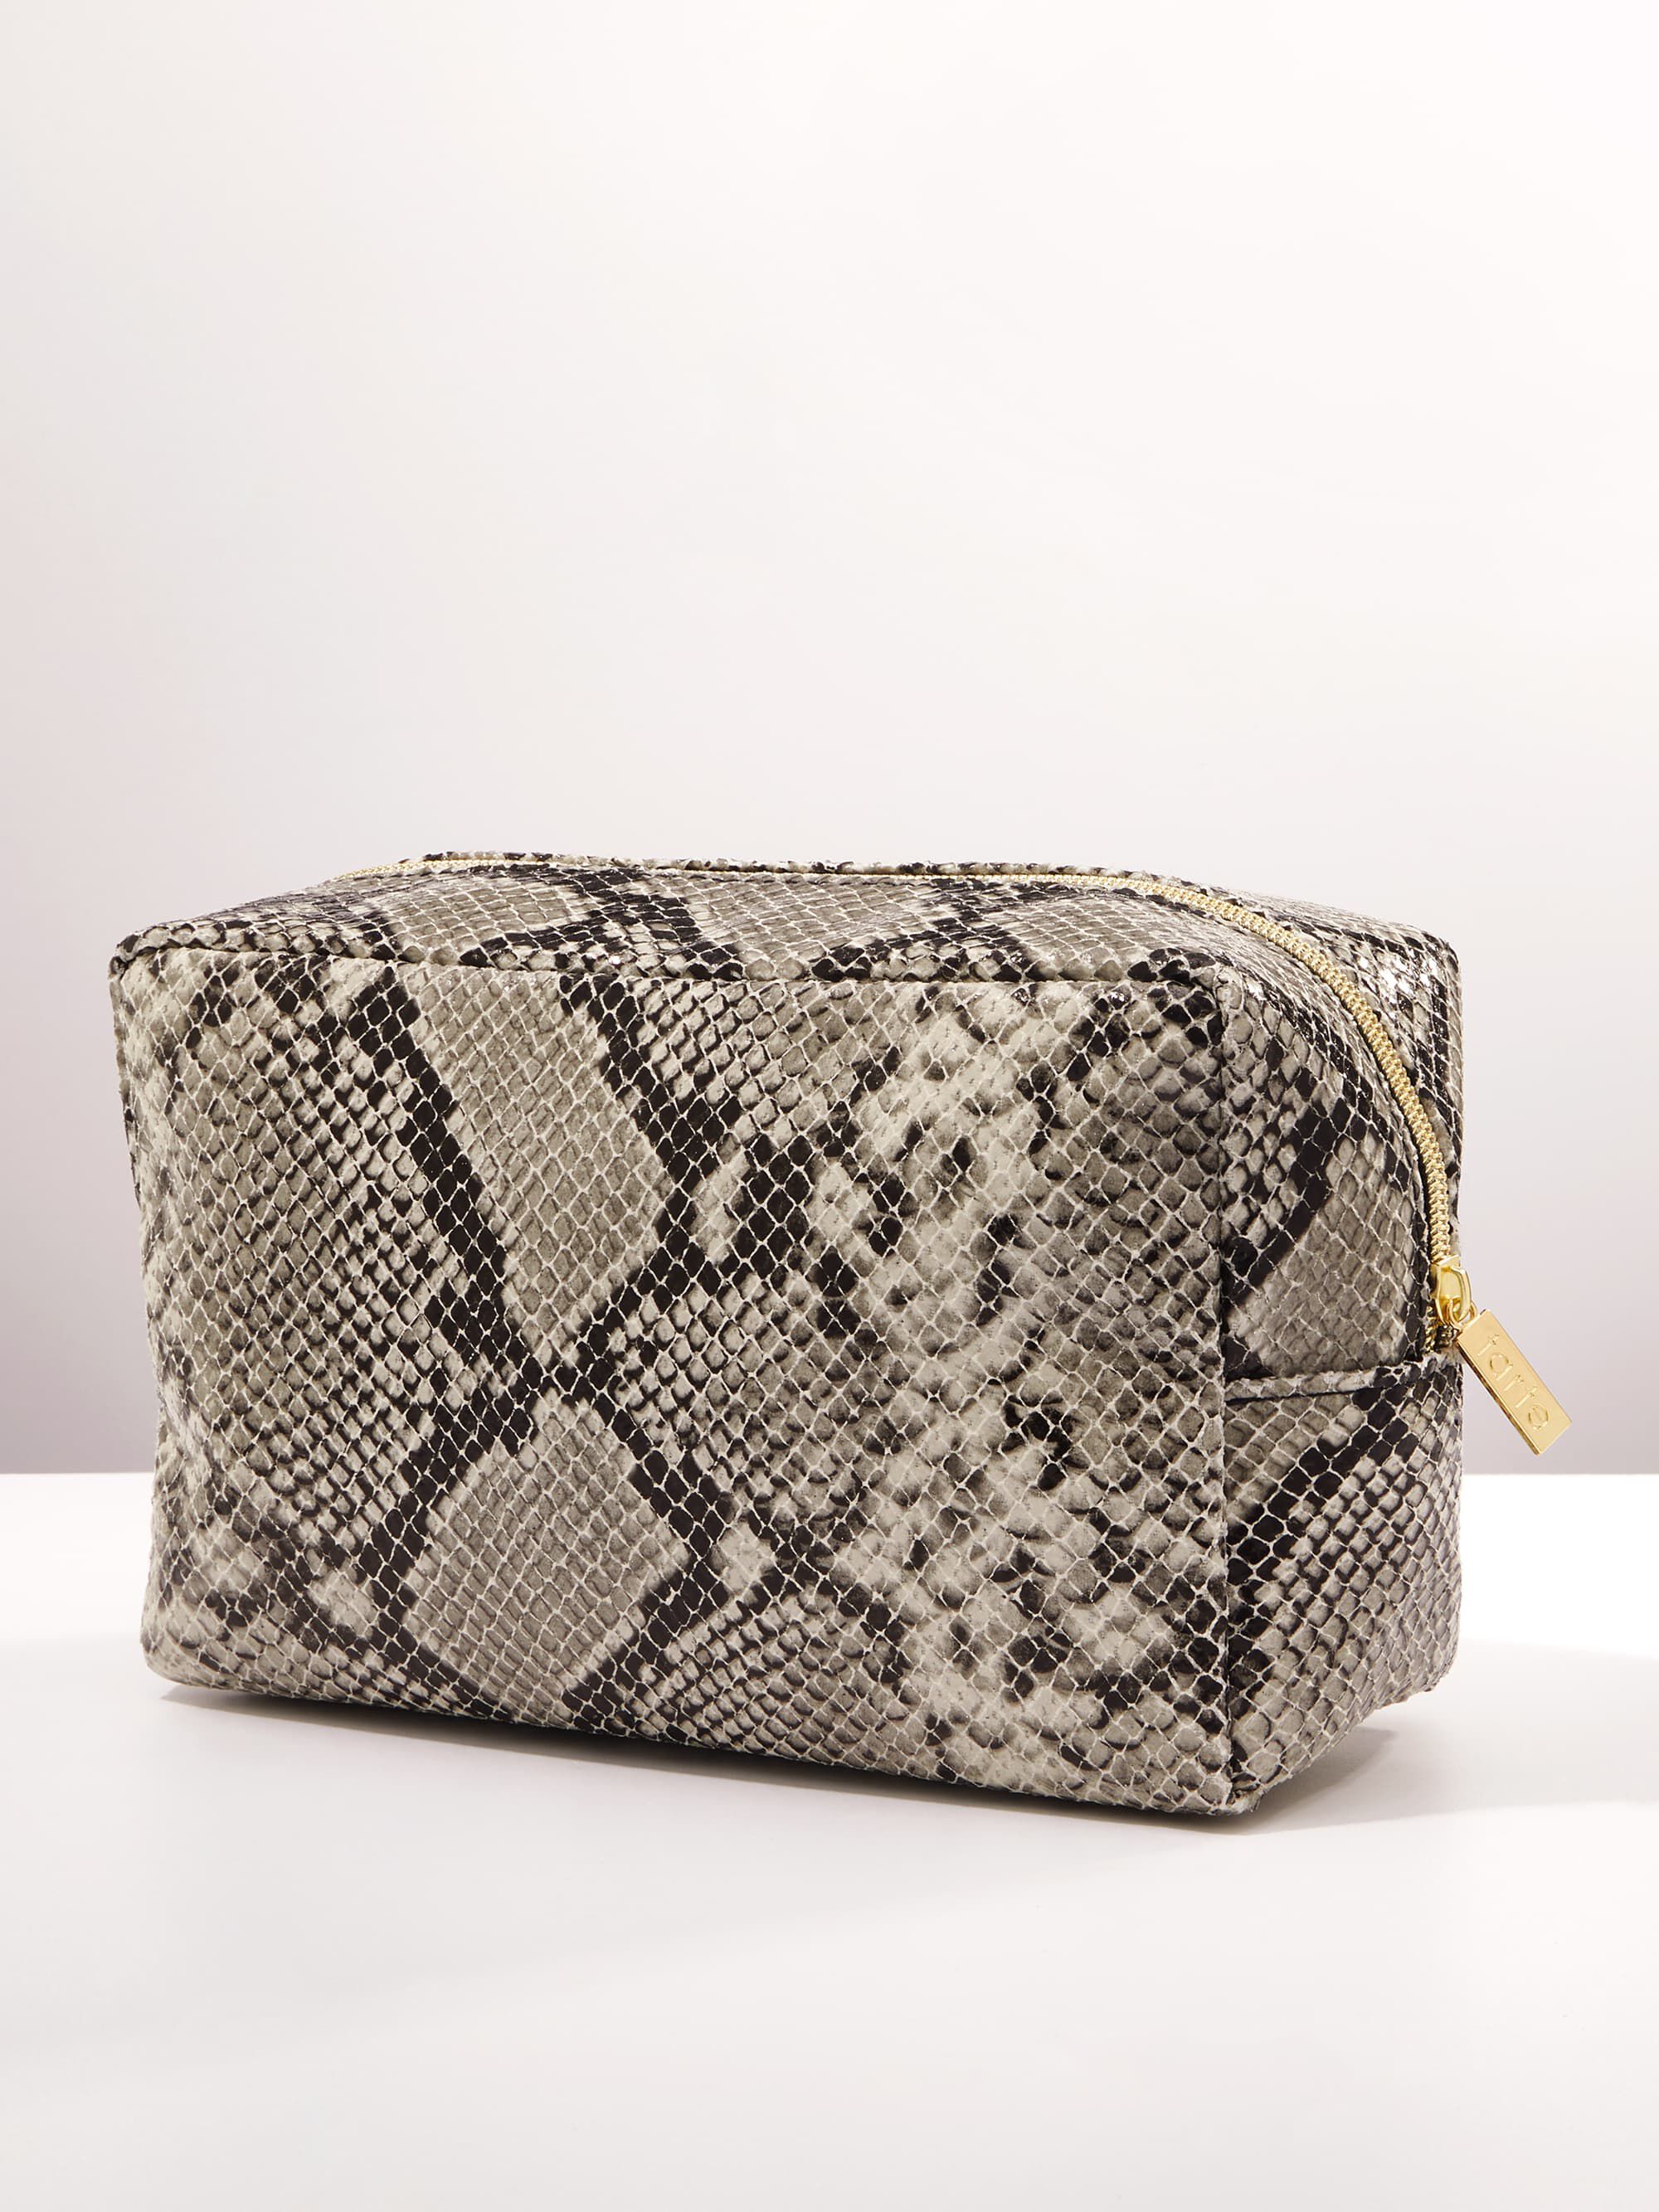 Buy Louis Vuitton Clutch Makeup Pouch Online in India 